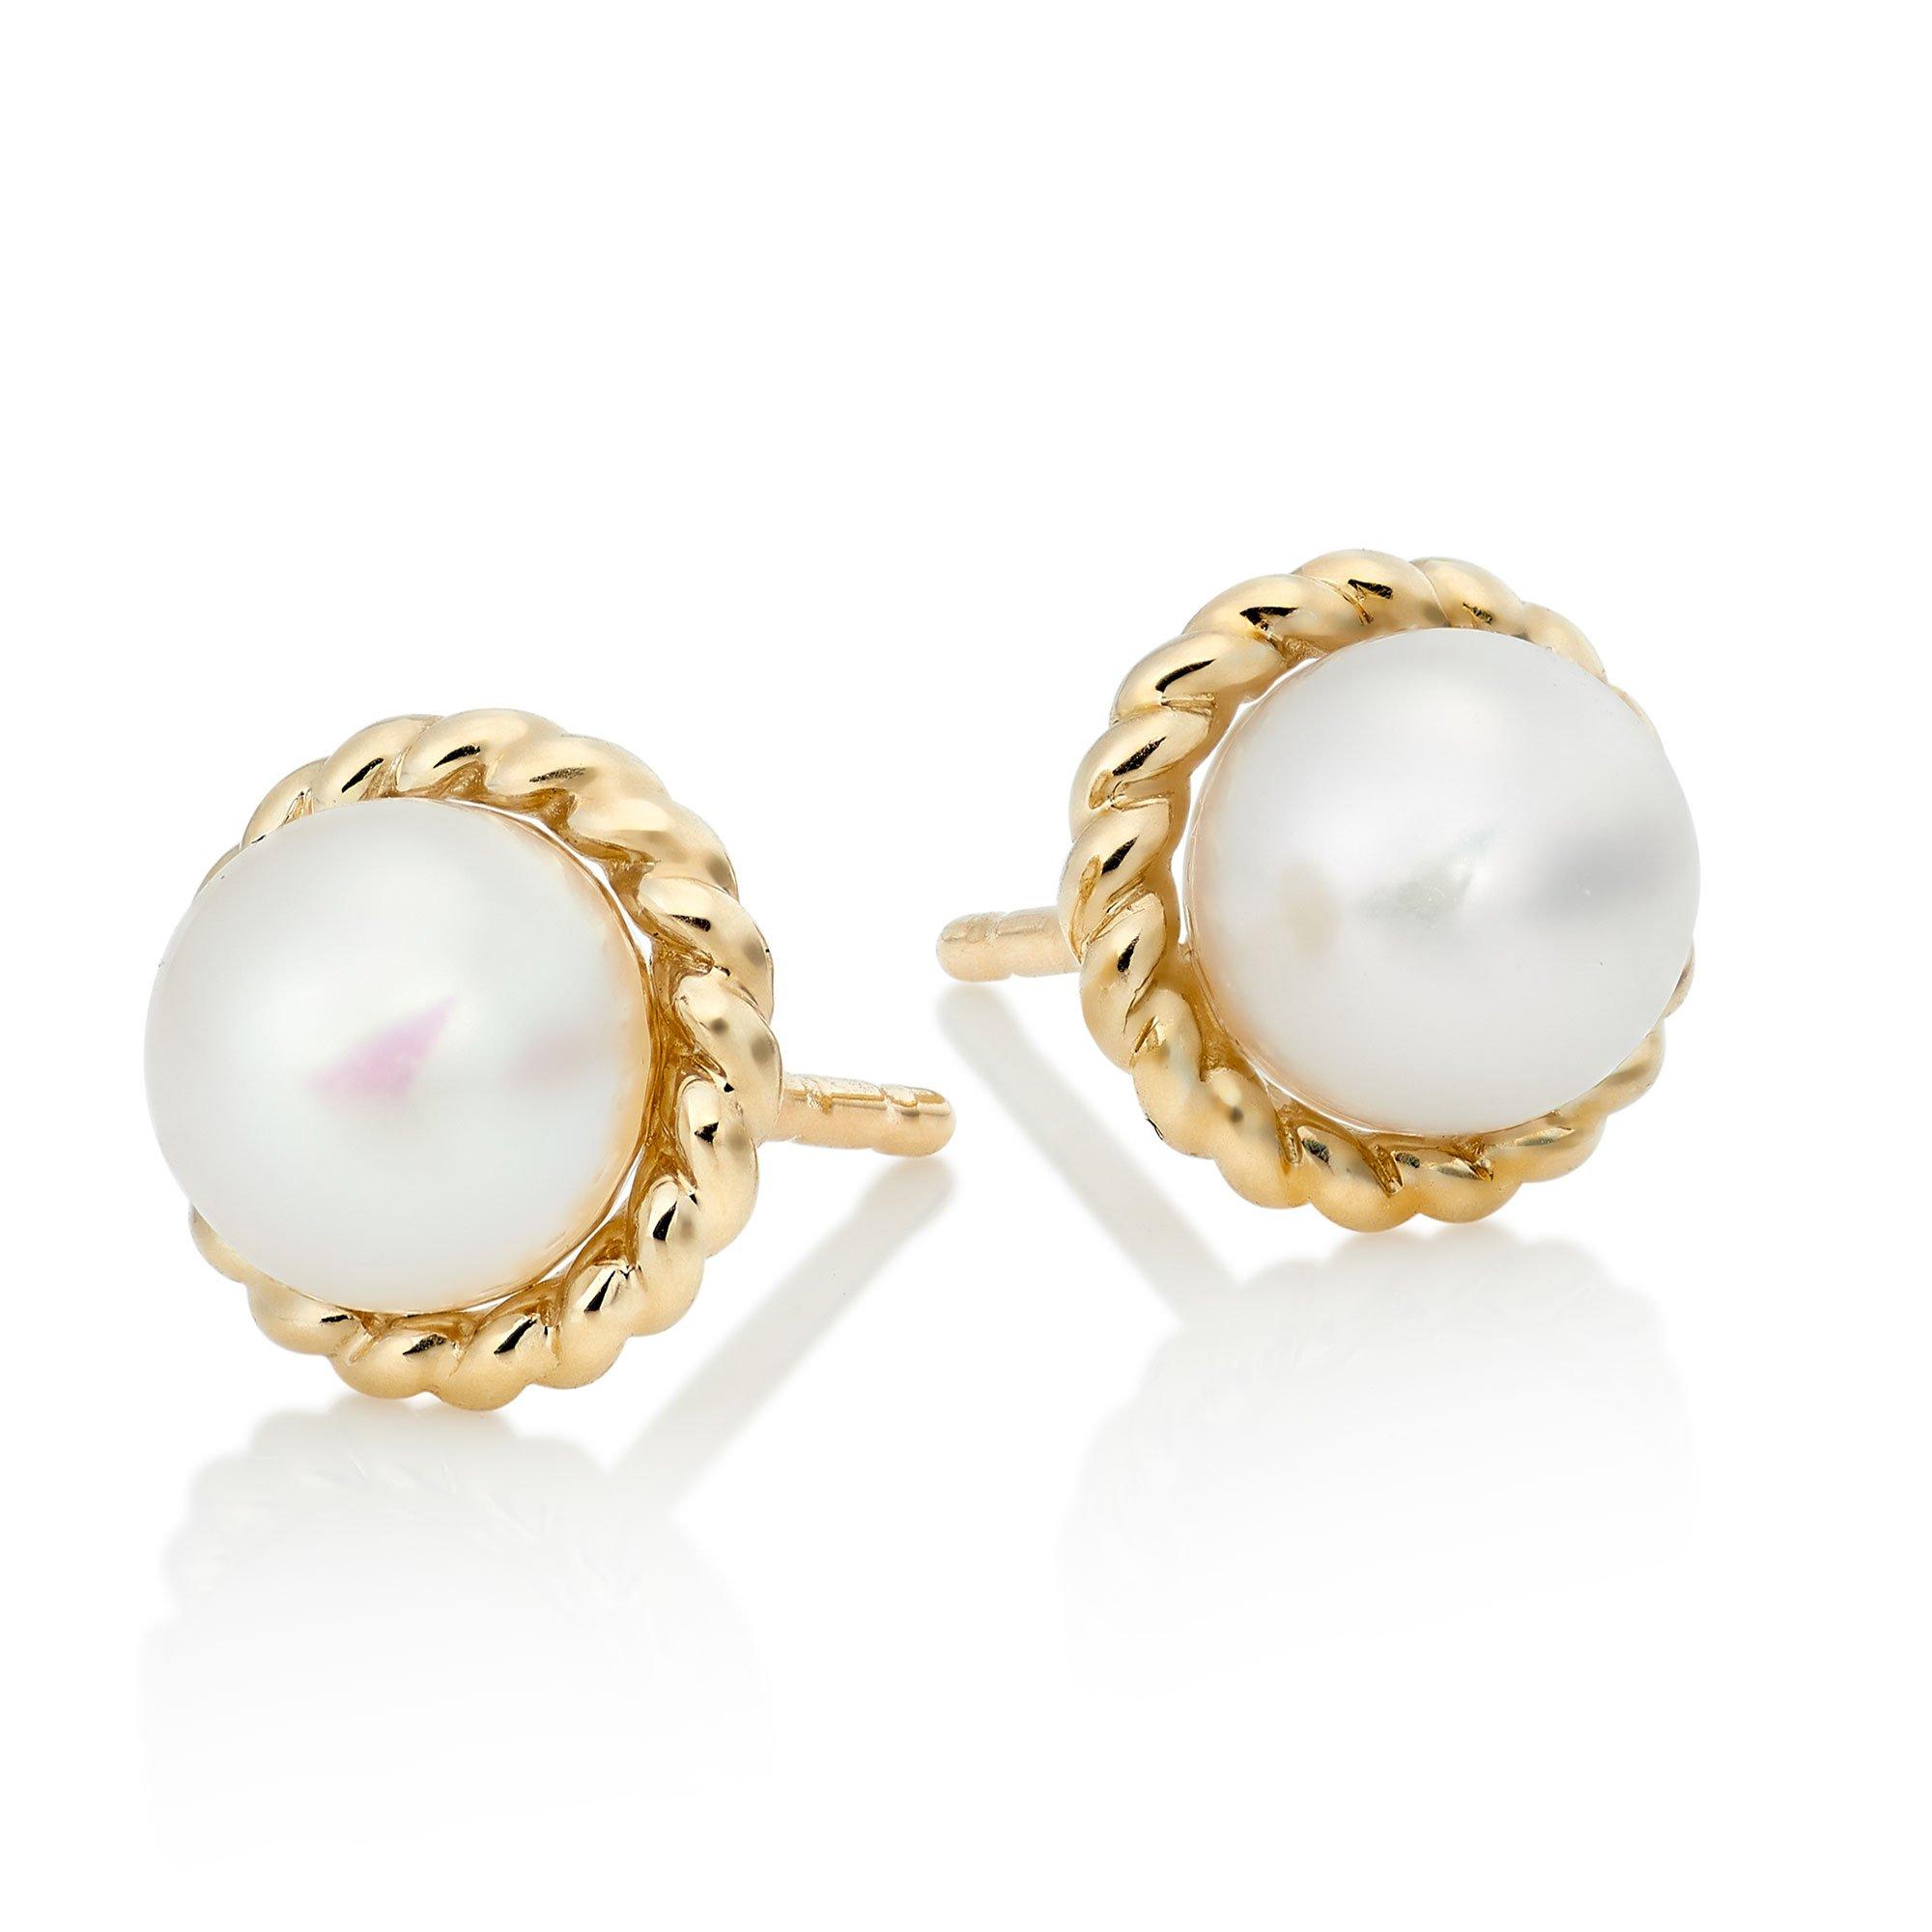 9ct Gold Freshwater Cultured Pearl Stud Earrings | 0121662 ...